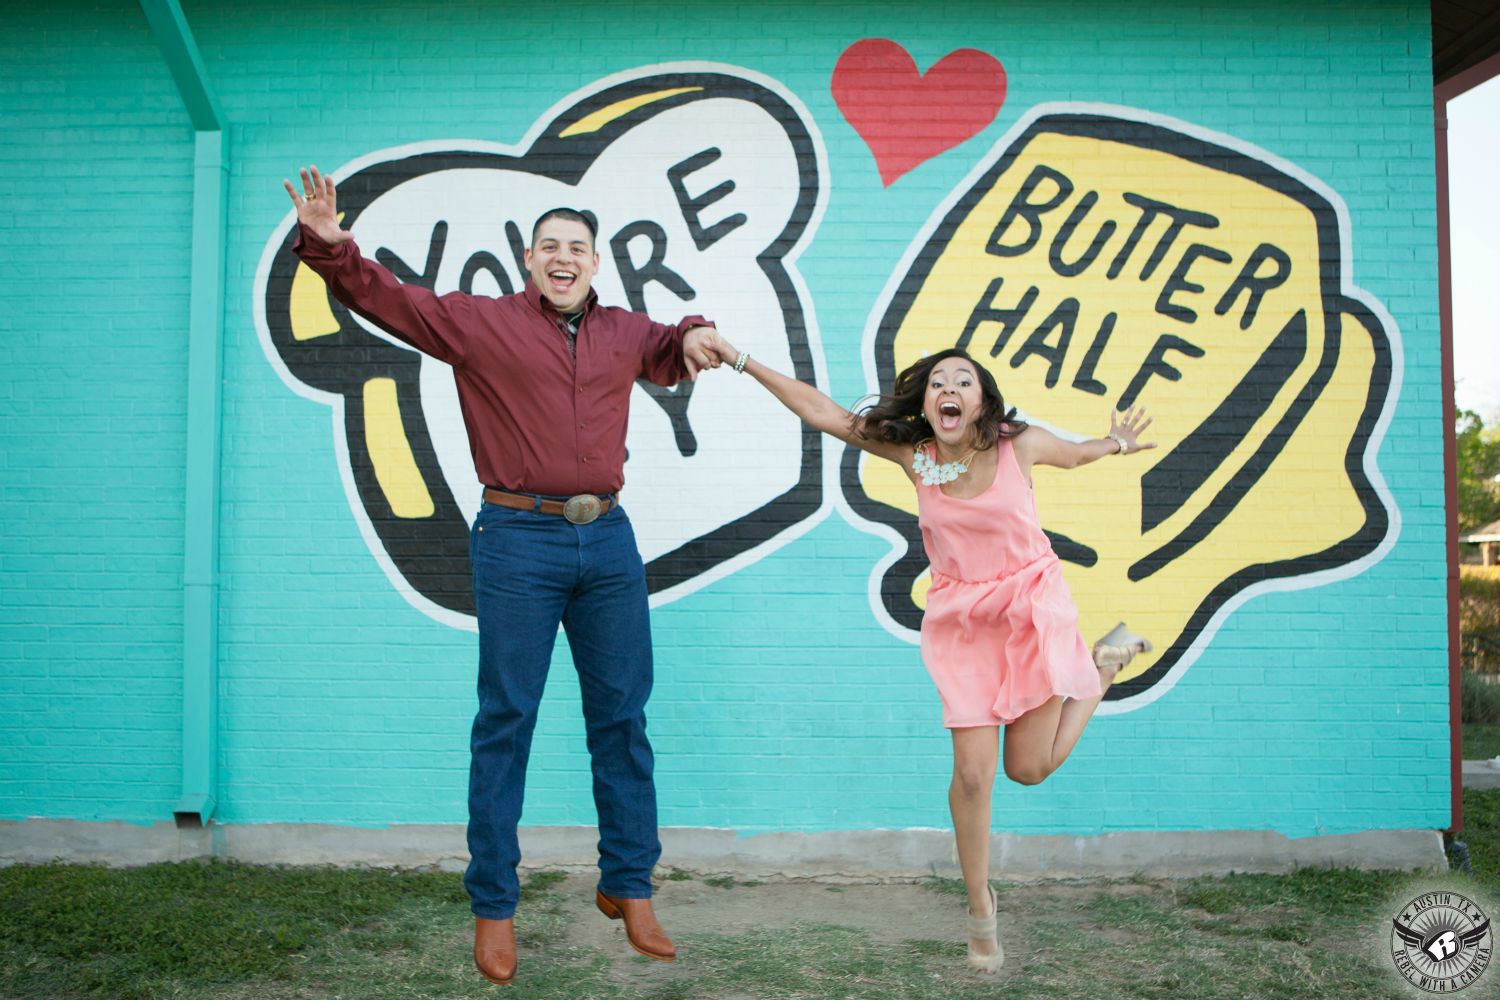 Latino girl with dark hair wearing a pink dress, strappy tan heels and a diamond necklace jumps for joy while holding the hand of a Latino guy with dark hair wearing a maroon button up shirt, a large belt buckle, blue jeans and cowboy boots also jumping in front of the You're My Butter Half mural in this fun engagement photo in East Austin